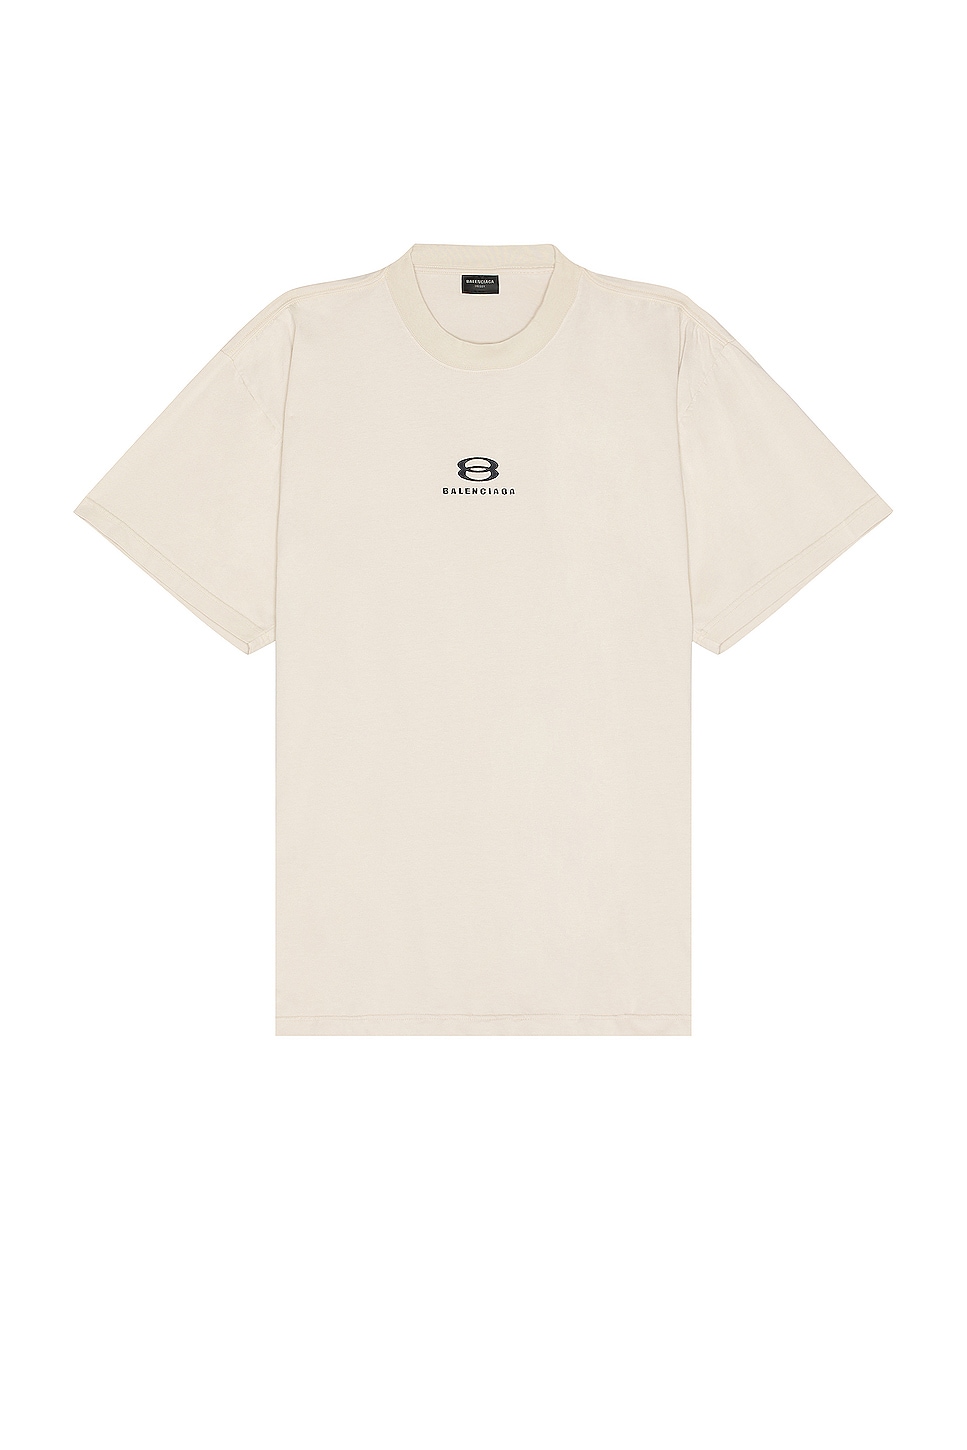 Image 1 of Balenciaga Stretched T-Shirt in Light Beige & Black